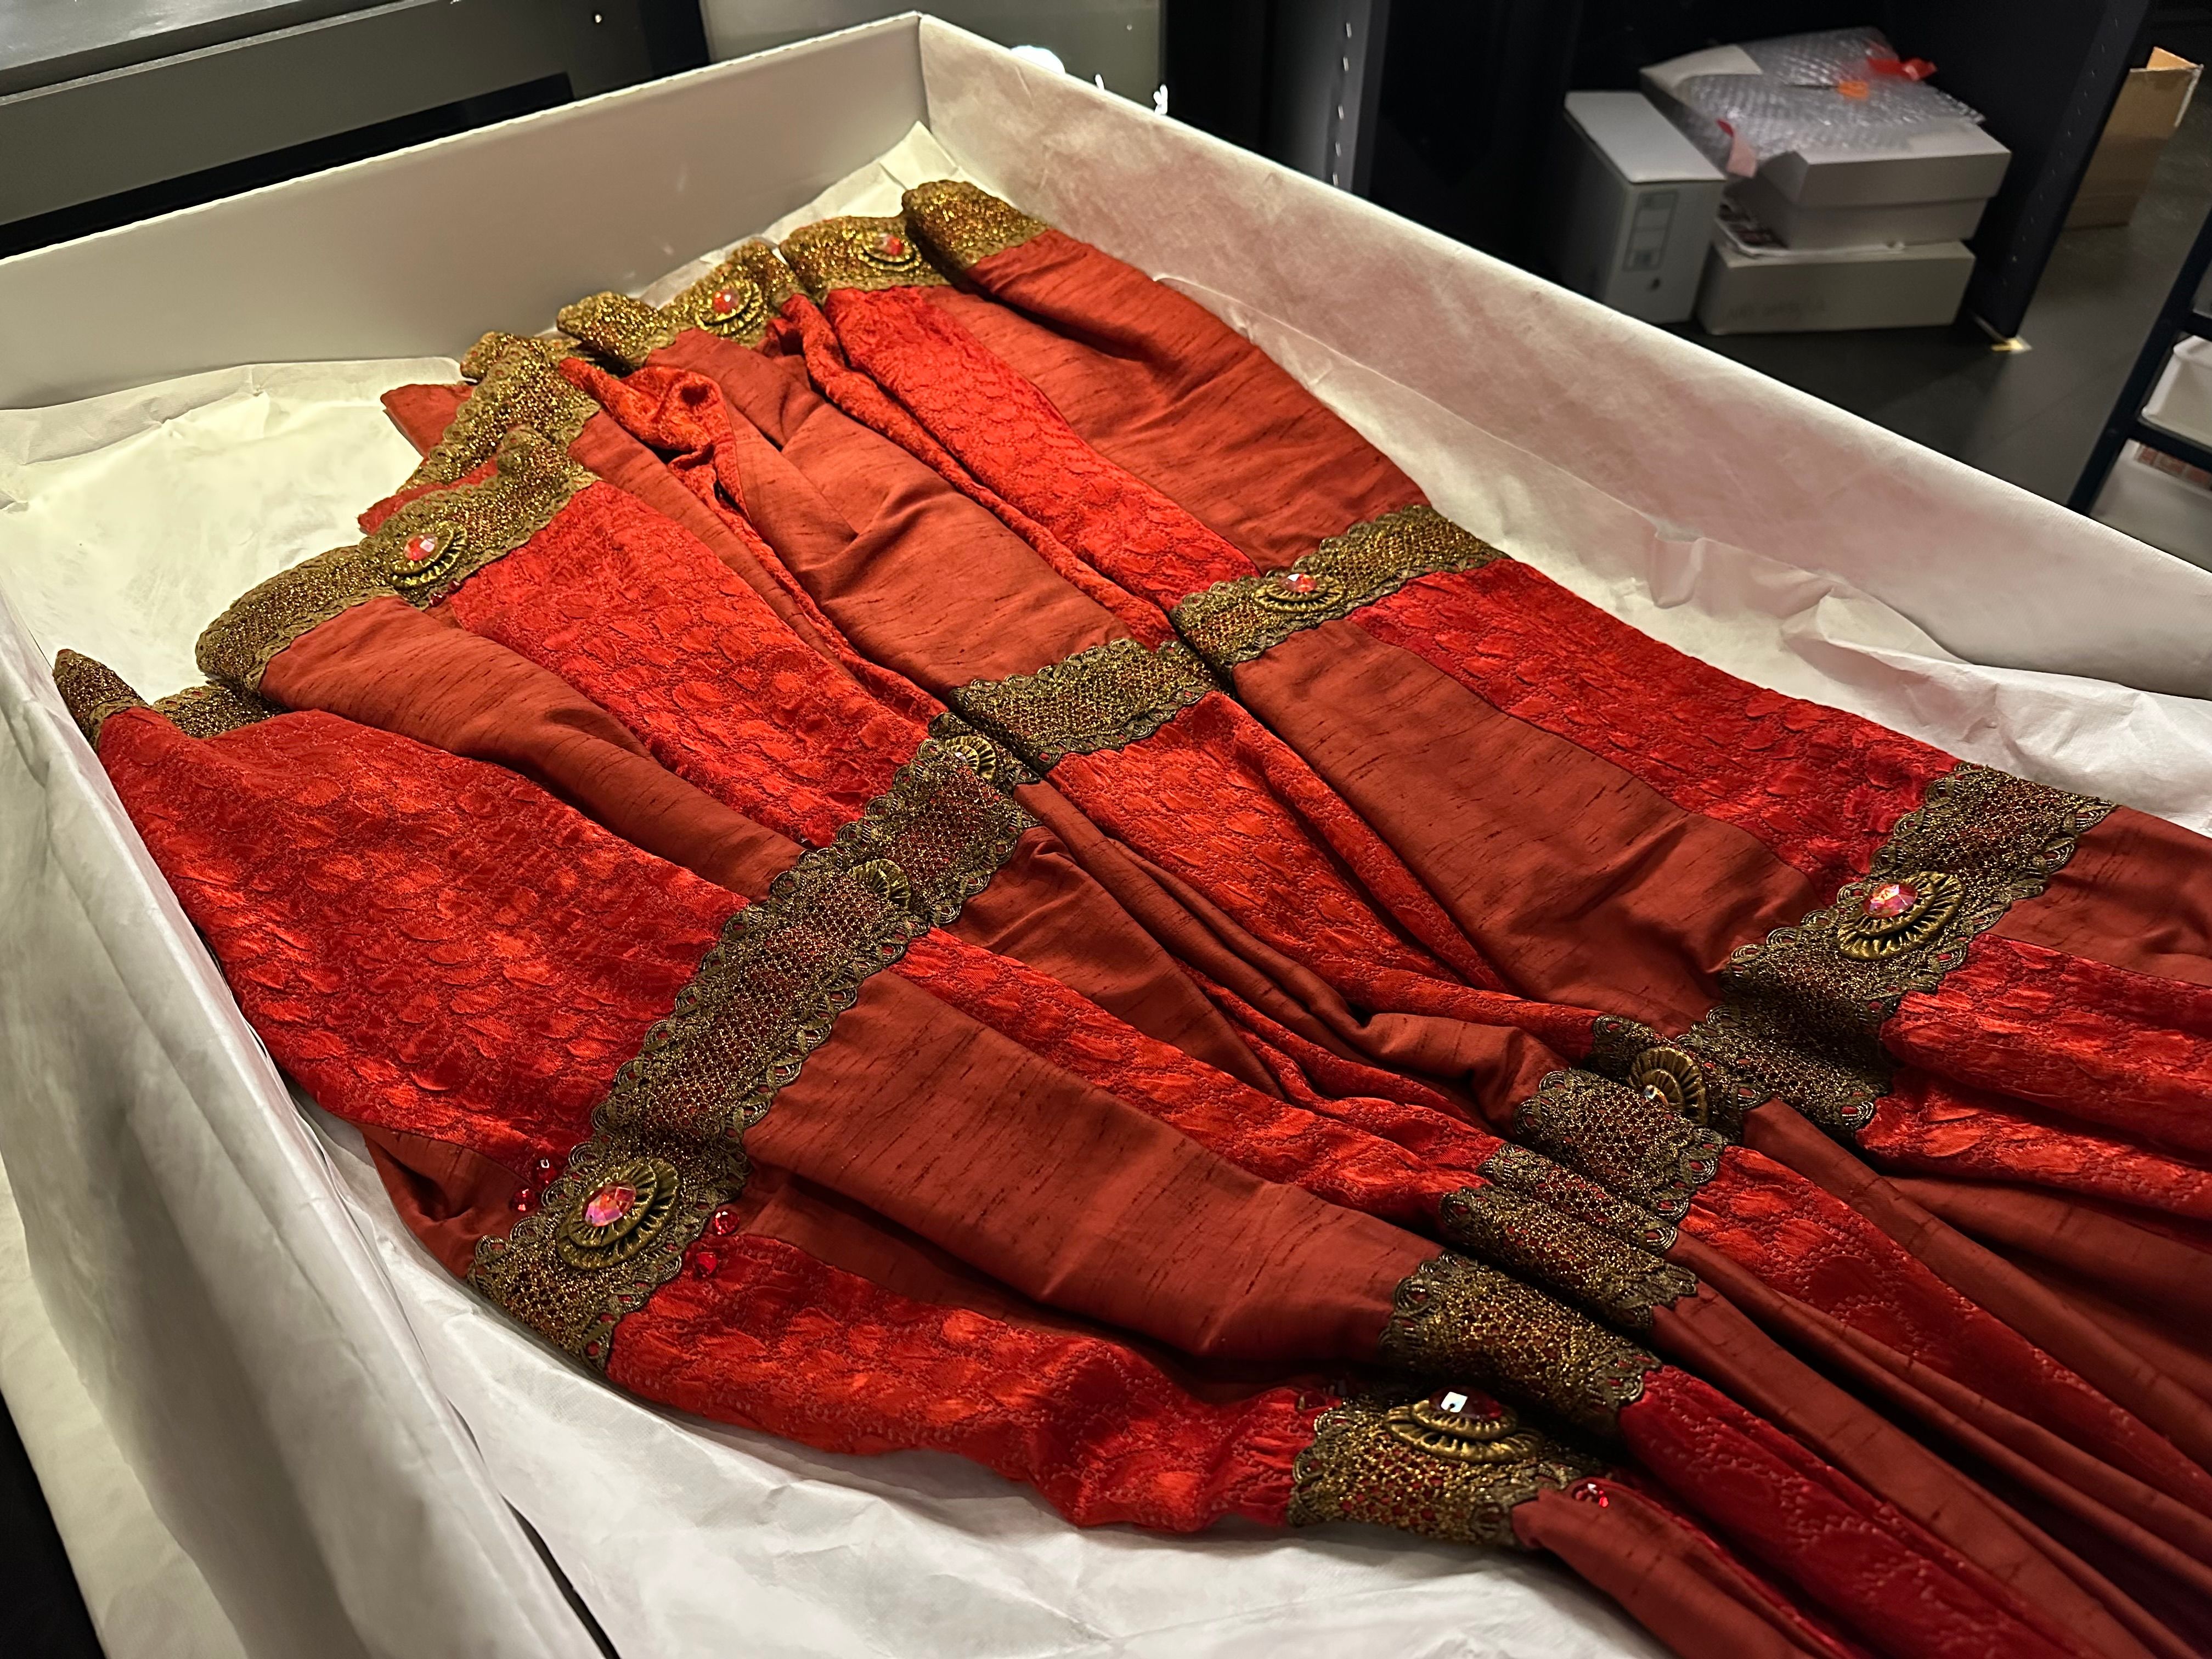 The skirt of the dress being unpacked